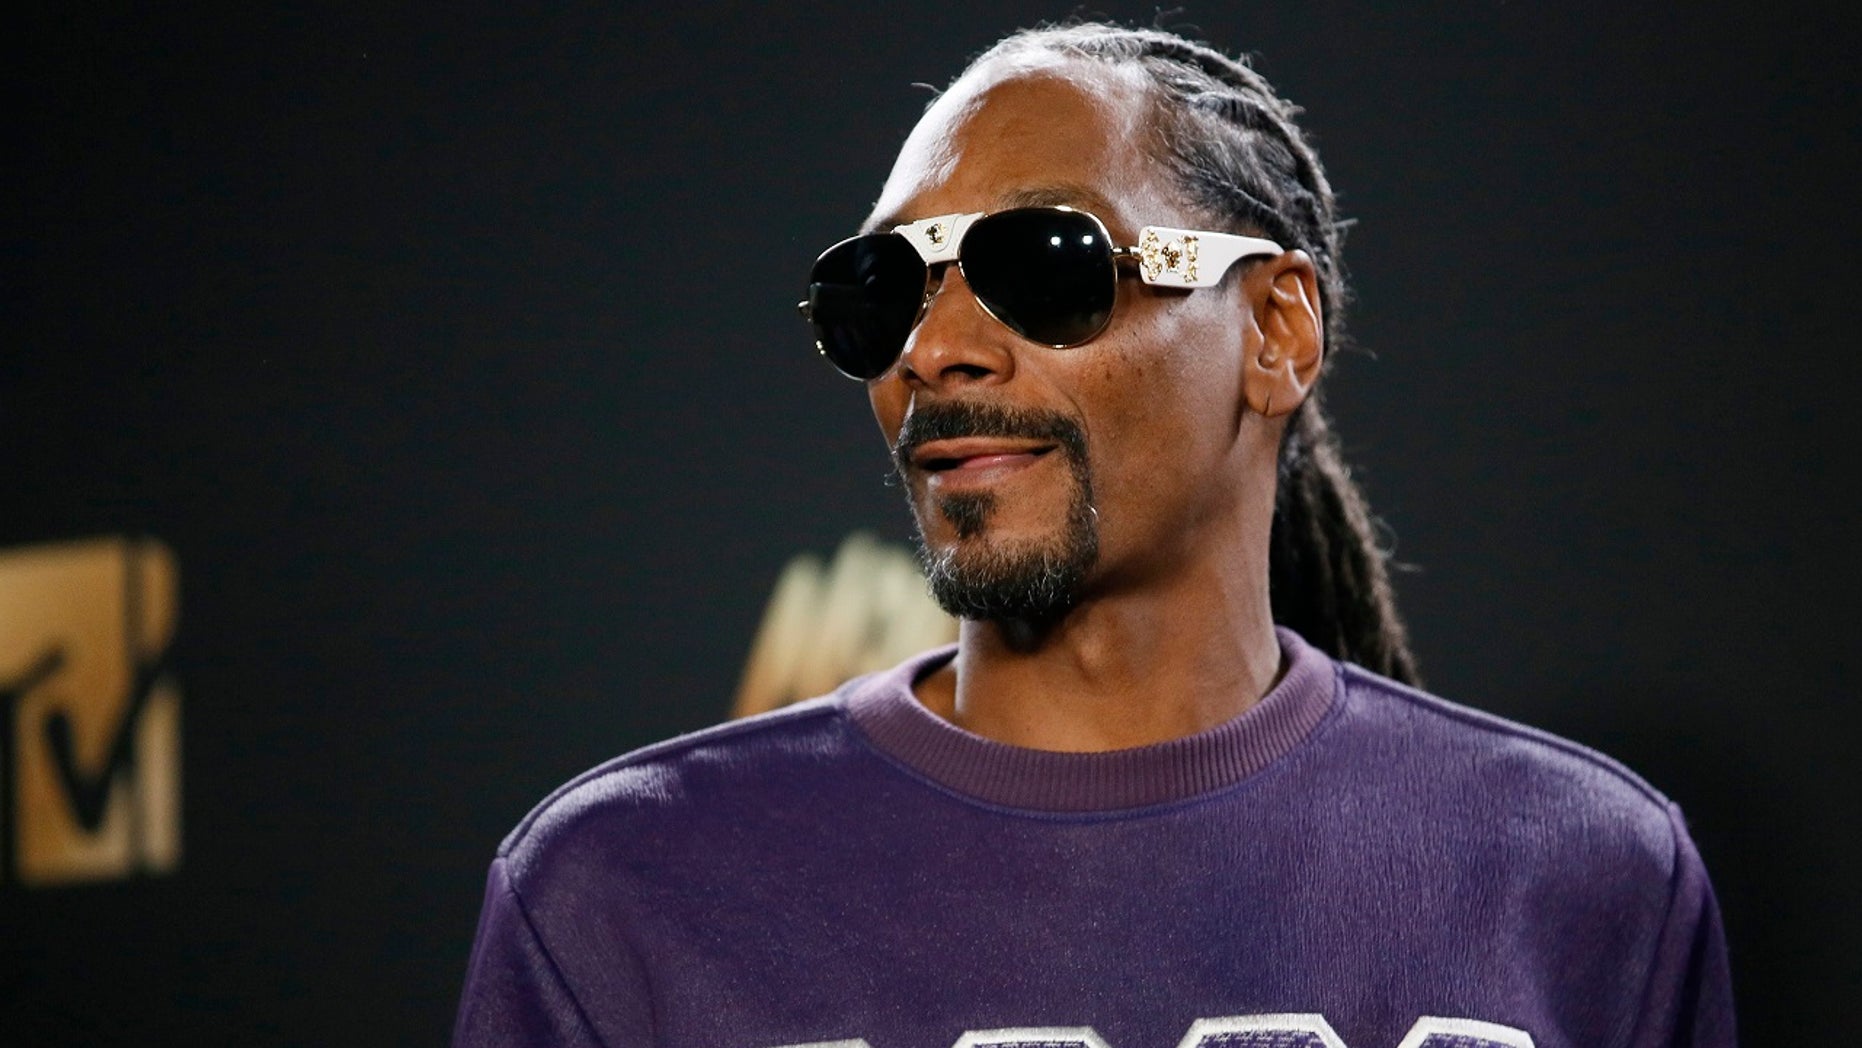 The rapper Snoop Dogg is seen in a video saying: 